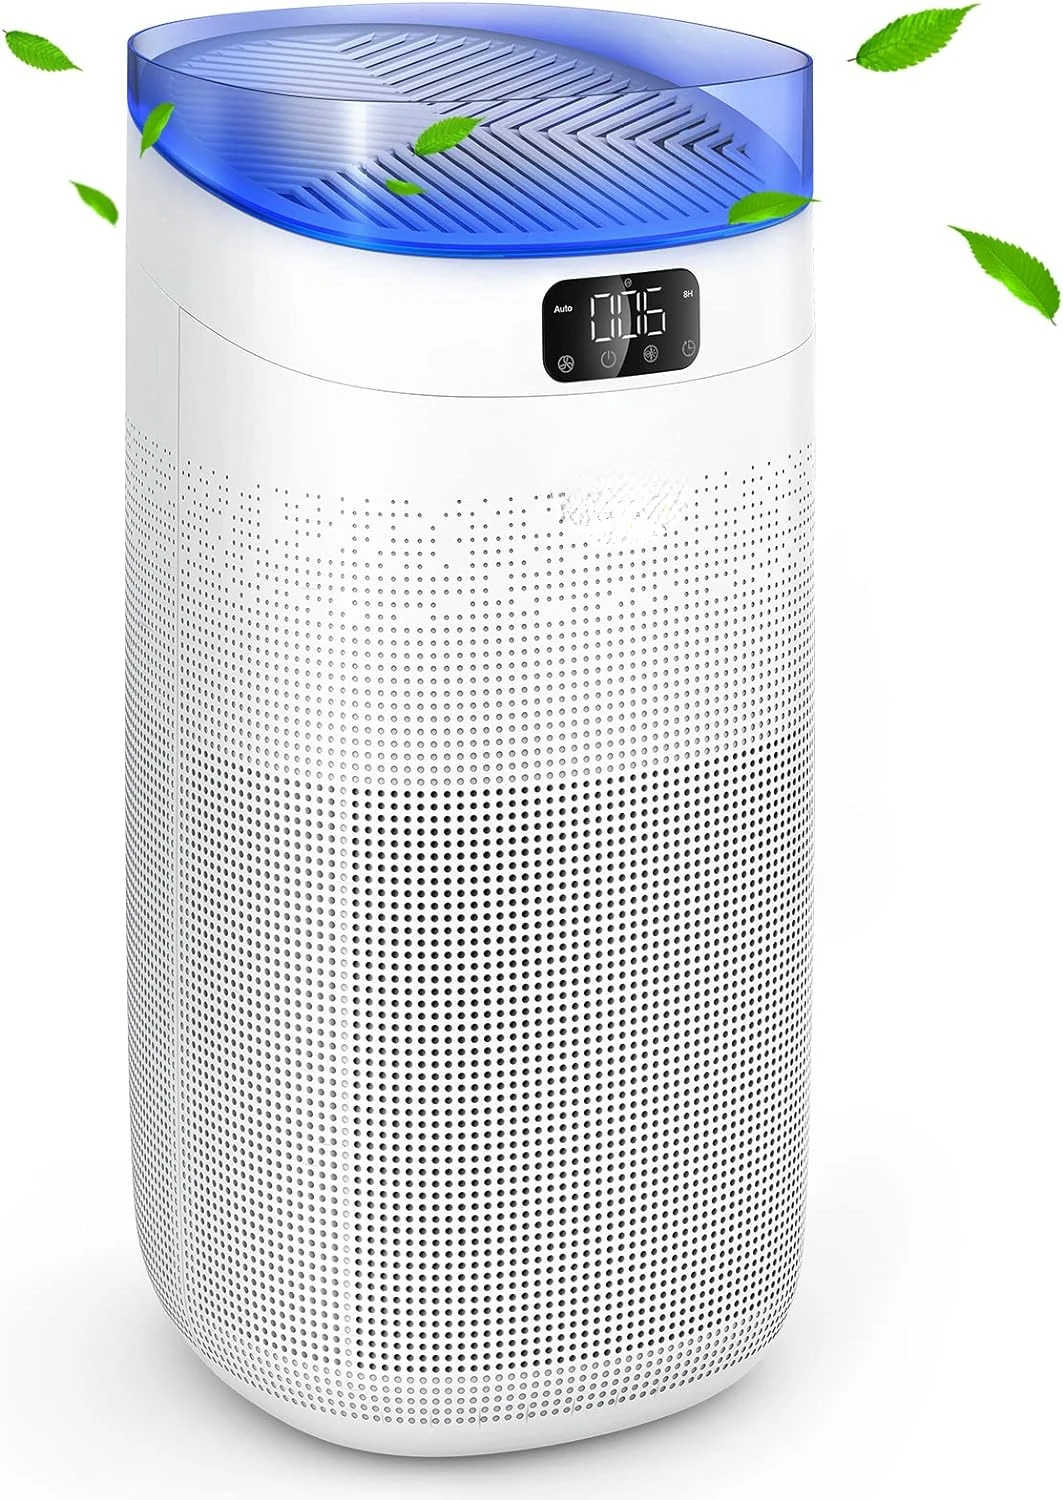 

Air Purifier for Home large room up to 1000sq ft, UVC LED with H13 True HEPA Filter, 25dB Air Cleaner with PM2.5 Monitor, Captur